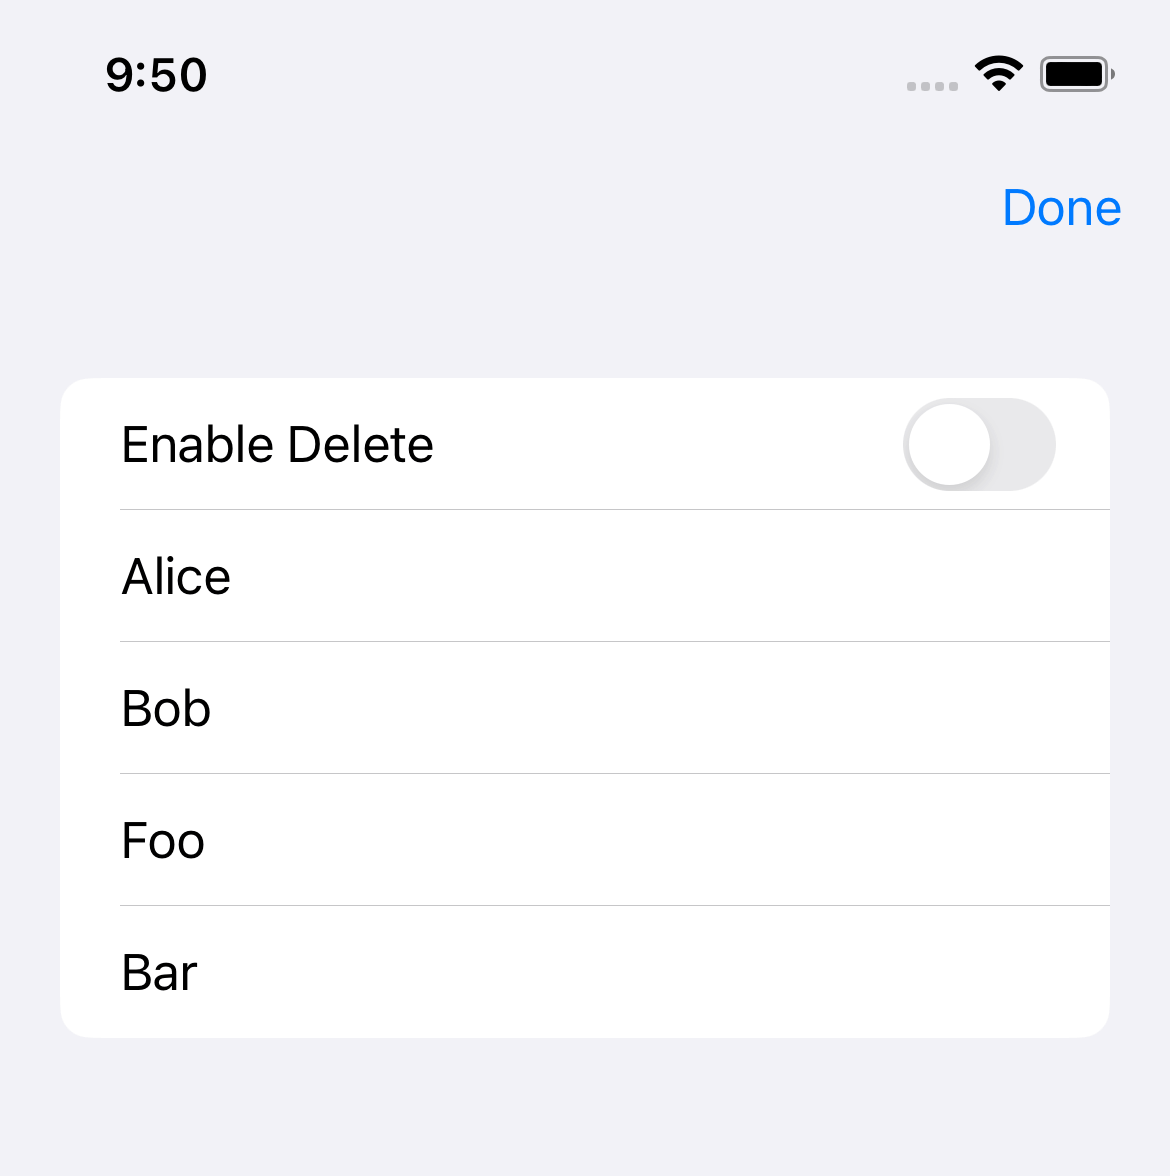 Disable the delete ability by passing nil to the onDelete.